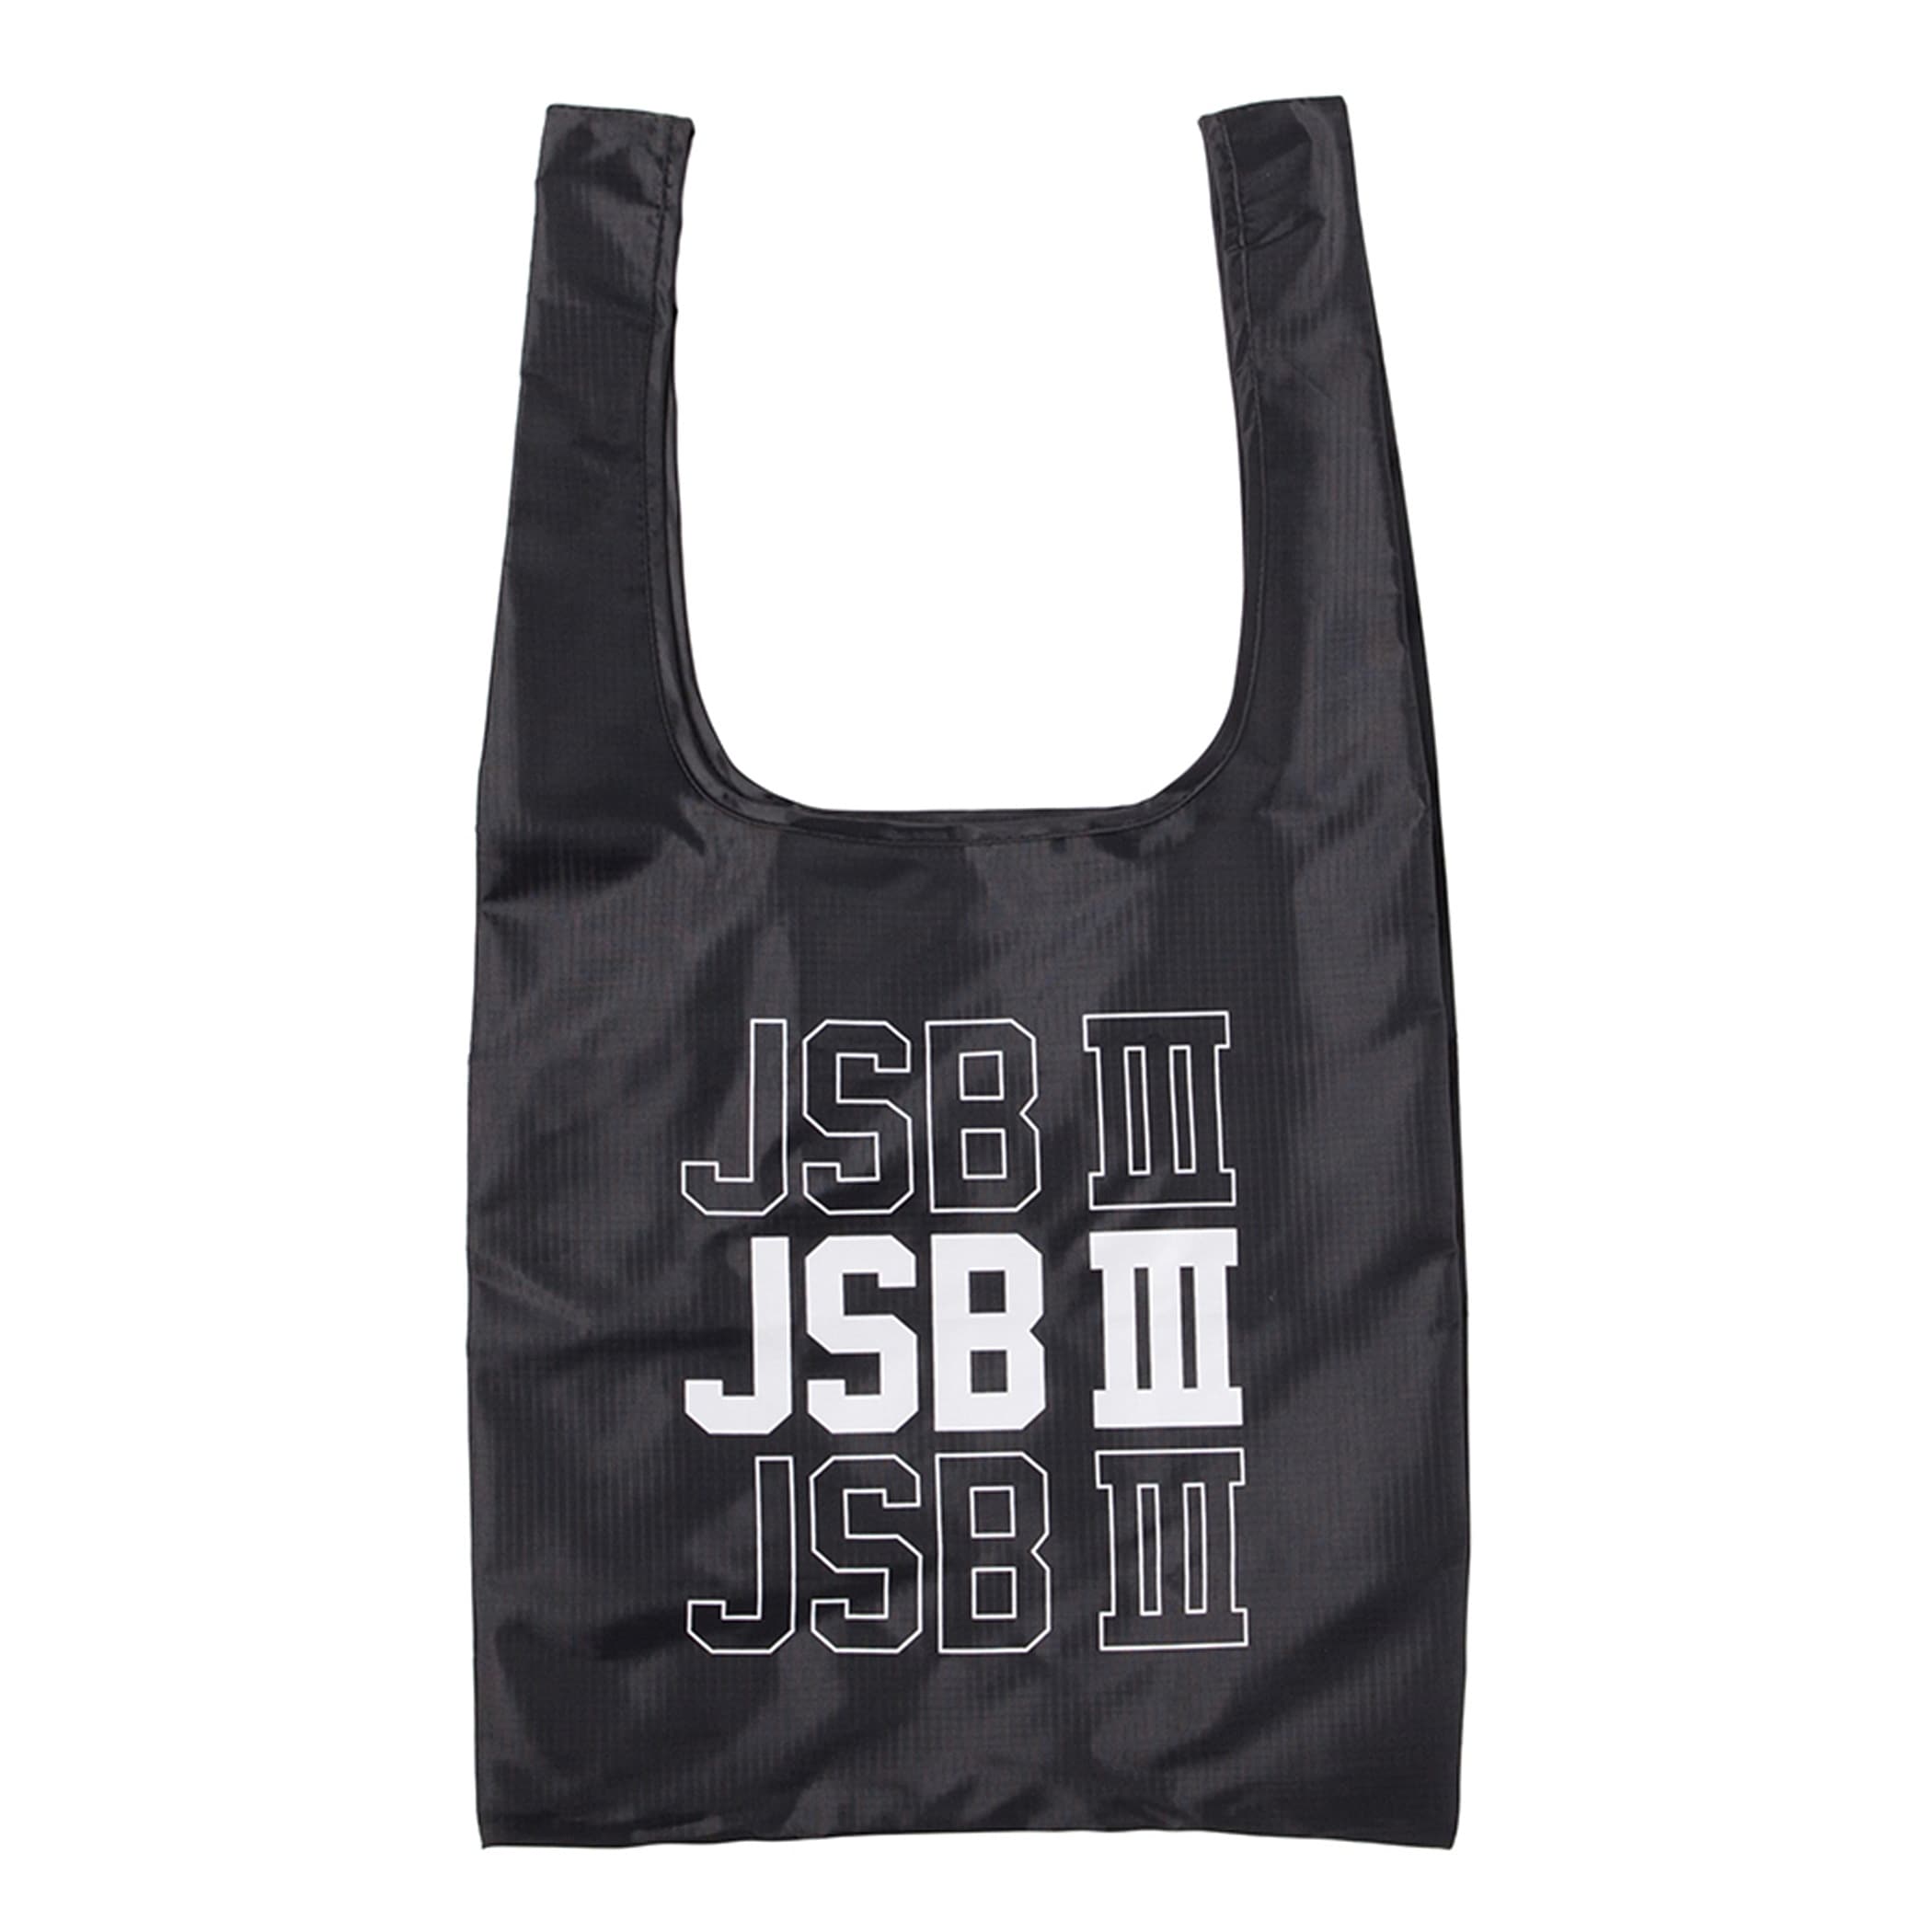 Exile Tribe Station Online Store 山下健二郎 Produce Jsb3エコバッグ